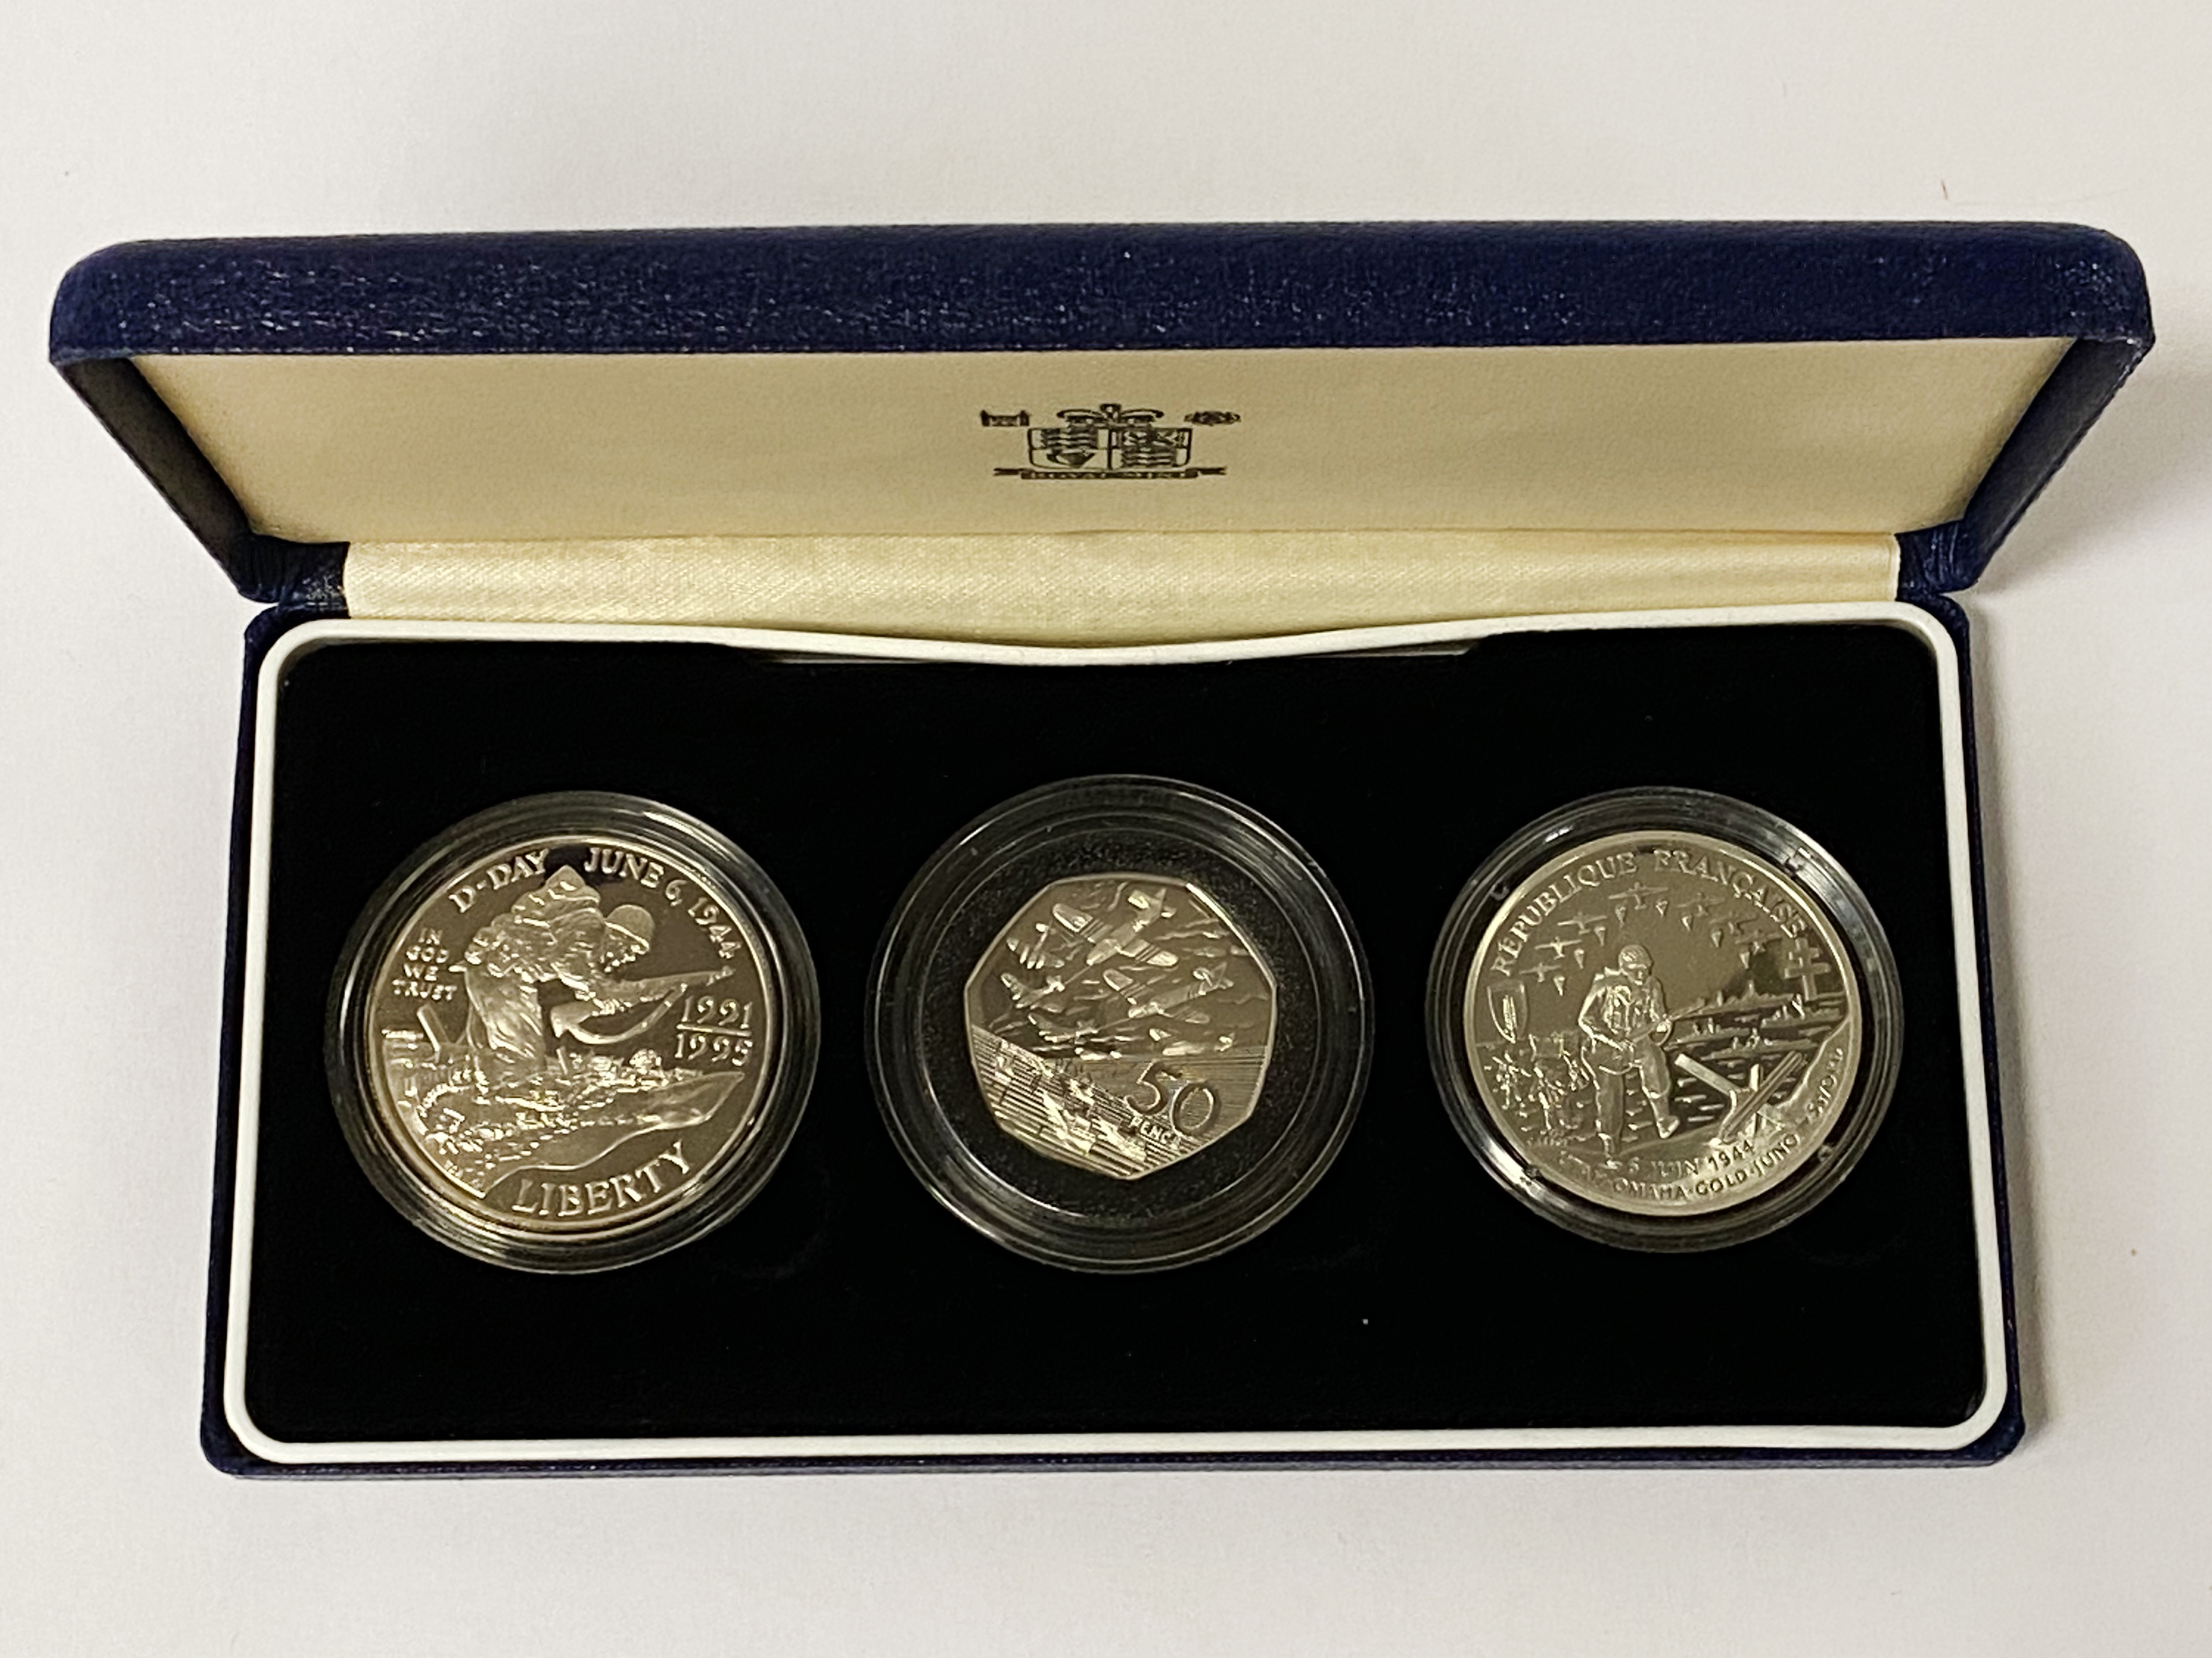 3 COIN SILVER PROOF COLLECTION & CERTIFICATE 1994 - Image 2 of 2